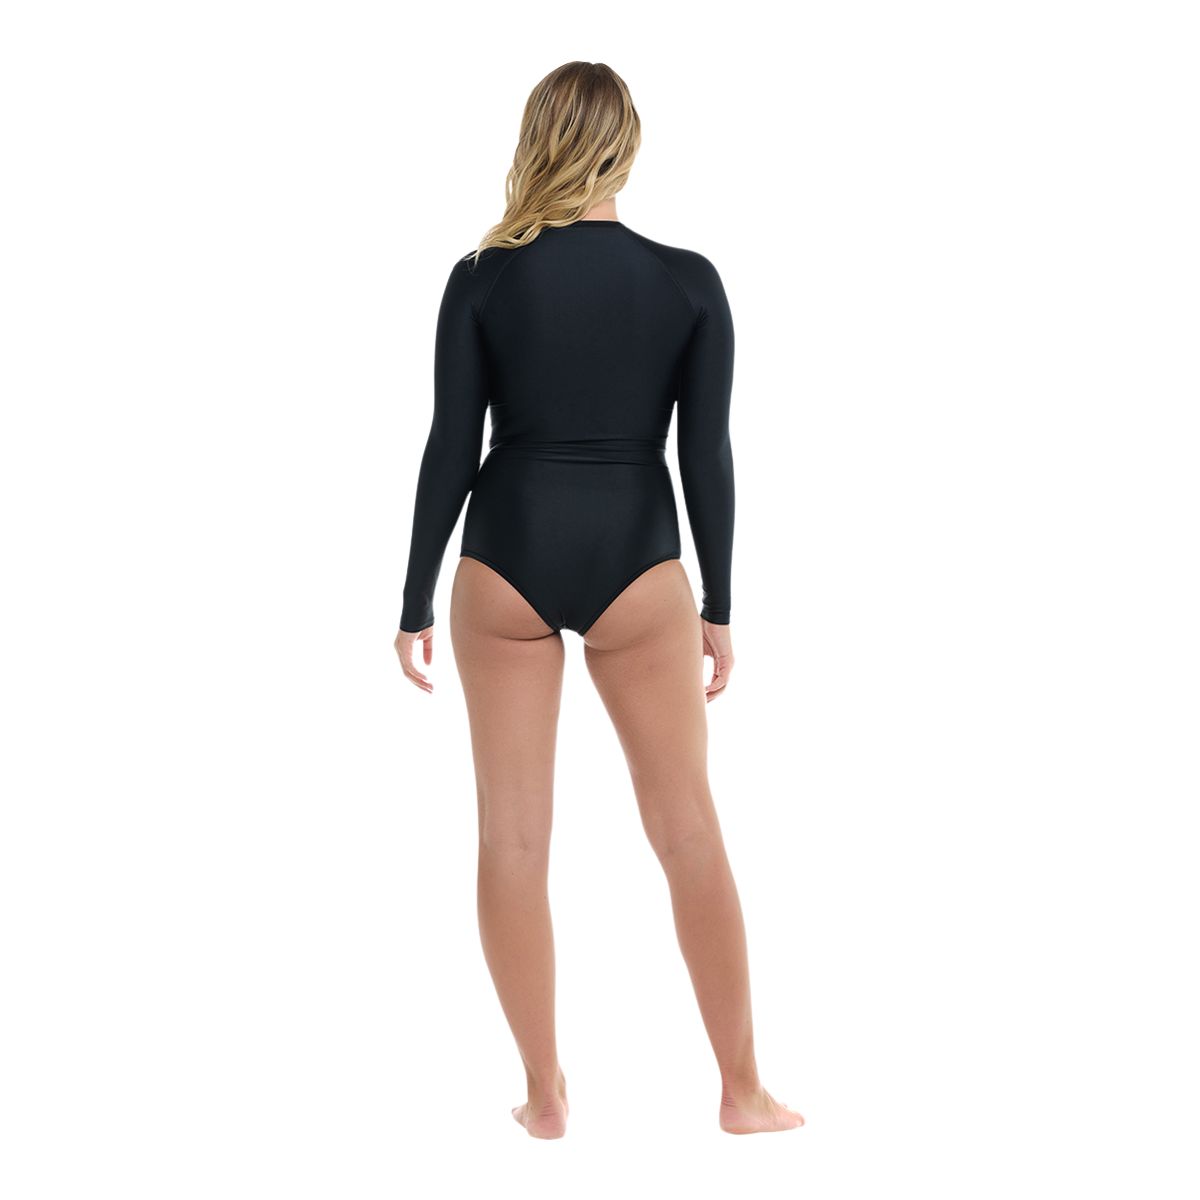 Body Glove Women's Smoothies Channel Cross-Over Paddle Swimsuit